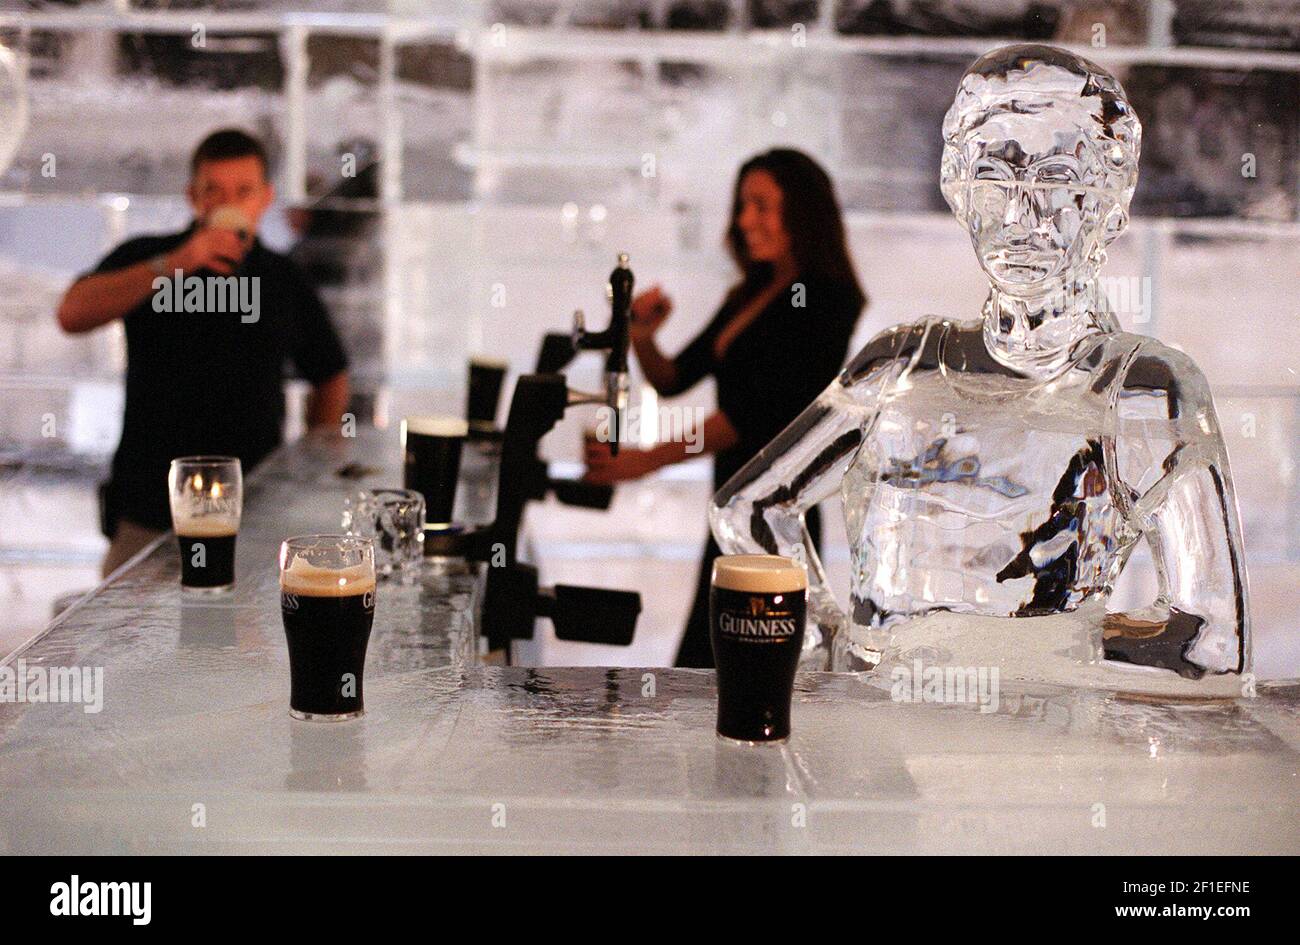 A WORKMAN SAMPLES A COLD GUINNESS AT THE ICE SCULPTURE BAR ON DISPLAY FOR A LIMITED TIME(UNTIL IT MELTS!) AT THE BROADGATE CIRCUS TODAY. SPONSORED BY GUINNESS . PHOTOGRAPH BY MARK CHILVERS. 19/9/00 Stock Photo